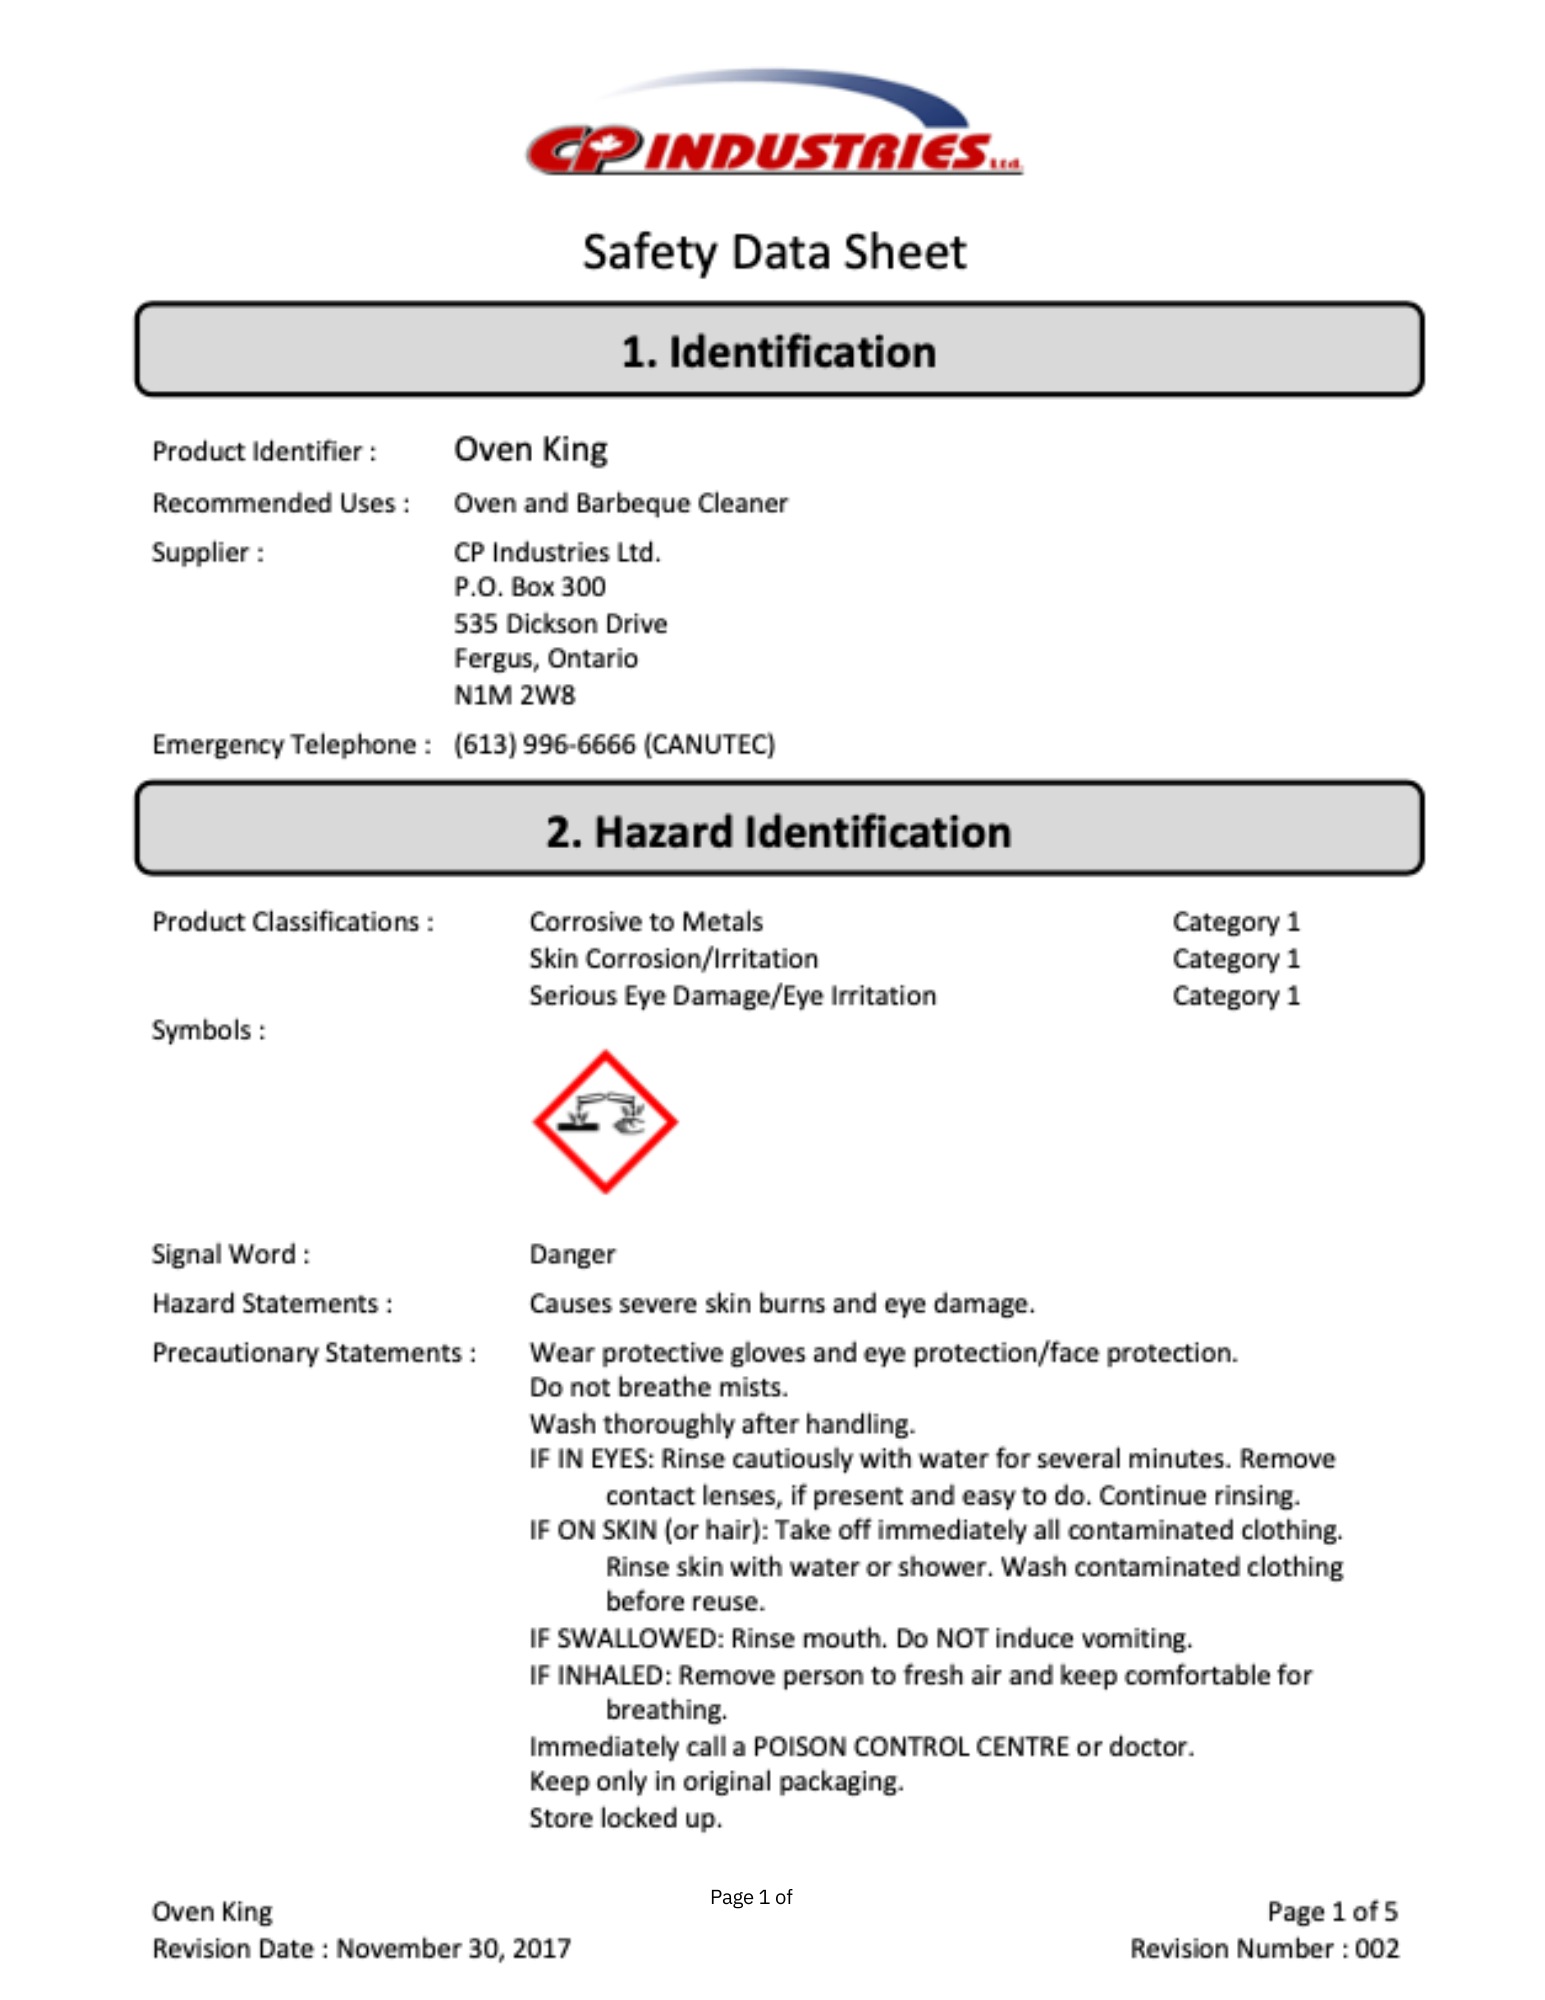 Safety Data Sheet from CP Industries for Bio Ovenclean.